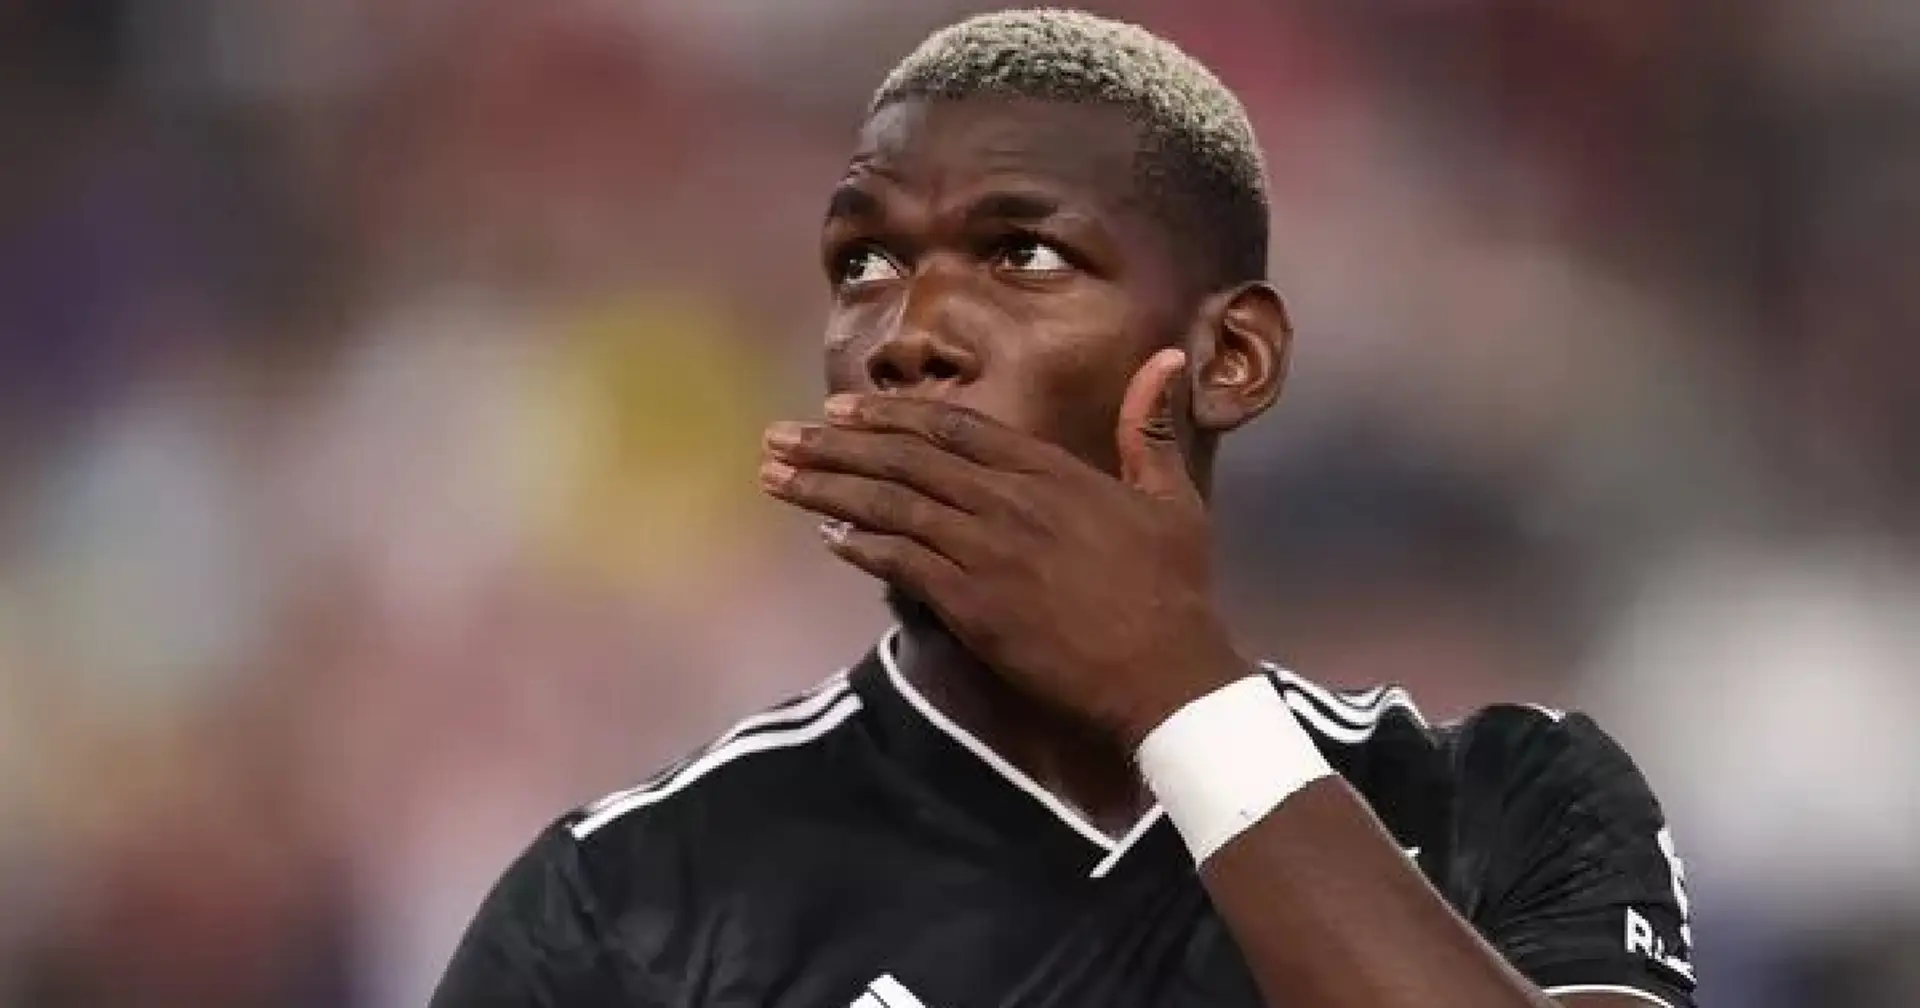 Paul Pogba tests positive for doping - could be banned for 4 years